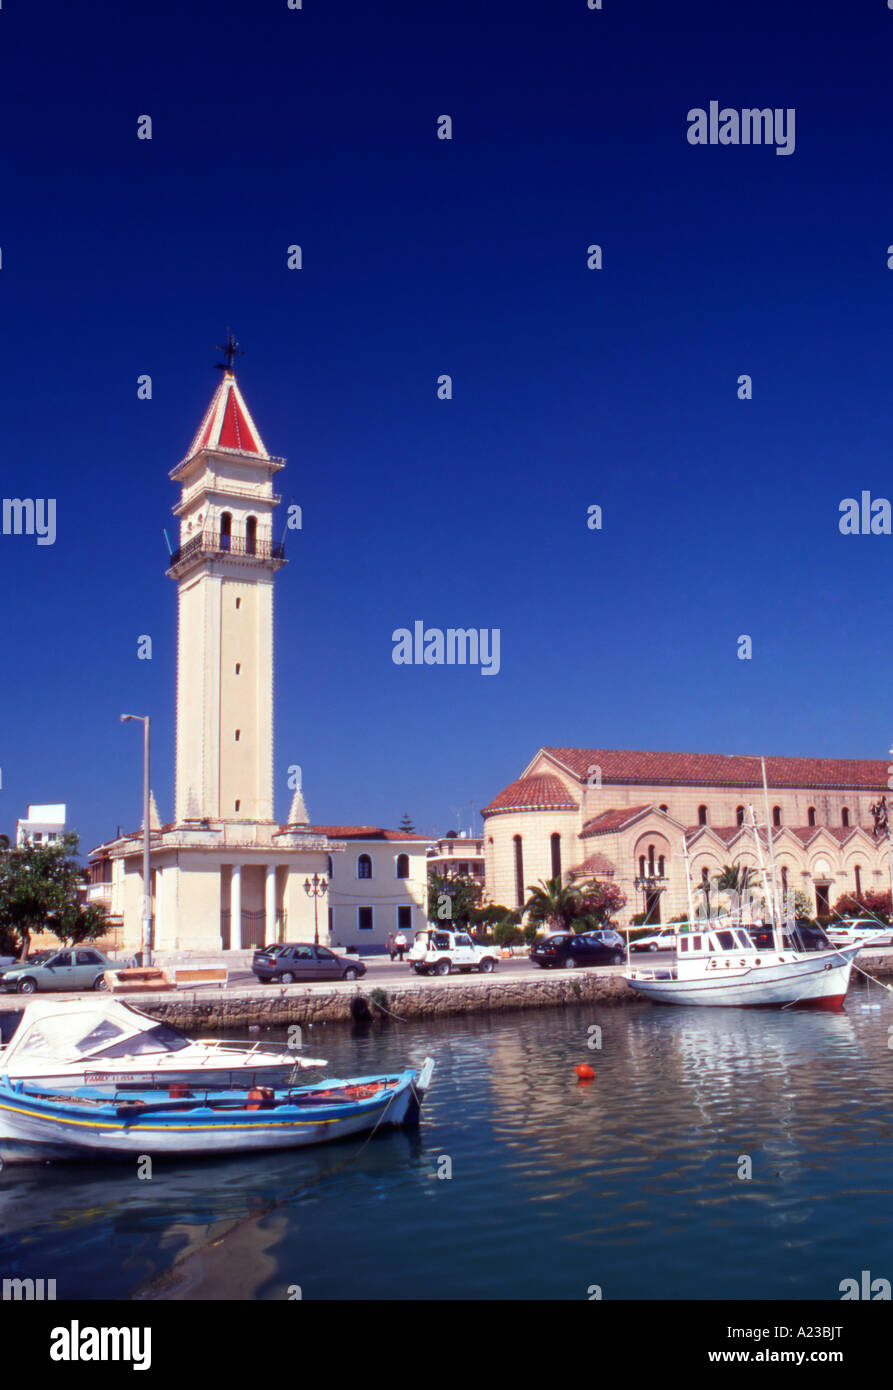 Greece Ionian Islands Zakynthos Zante Town Fishing boats in the harbour and the Cathedral of Aghios Dionysios in the background Stock Photo